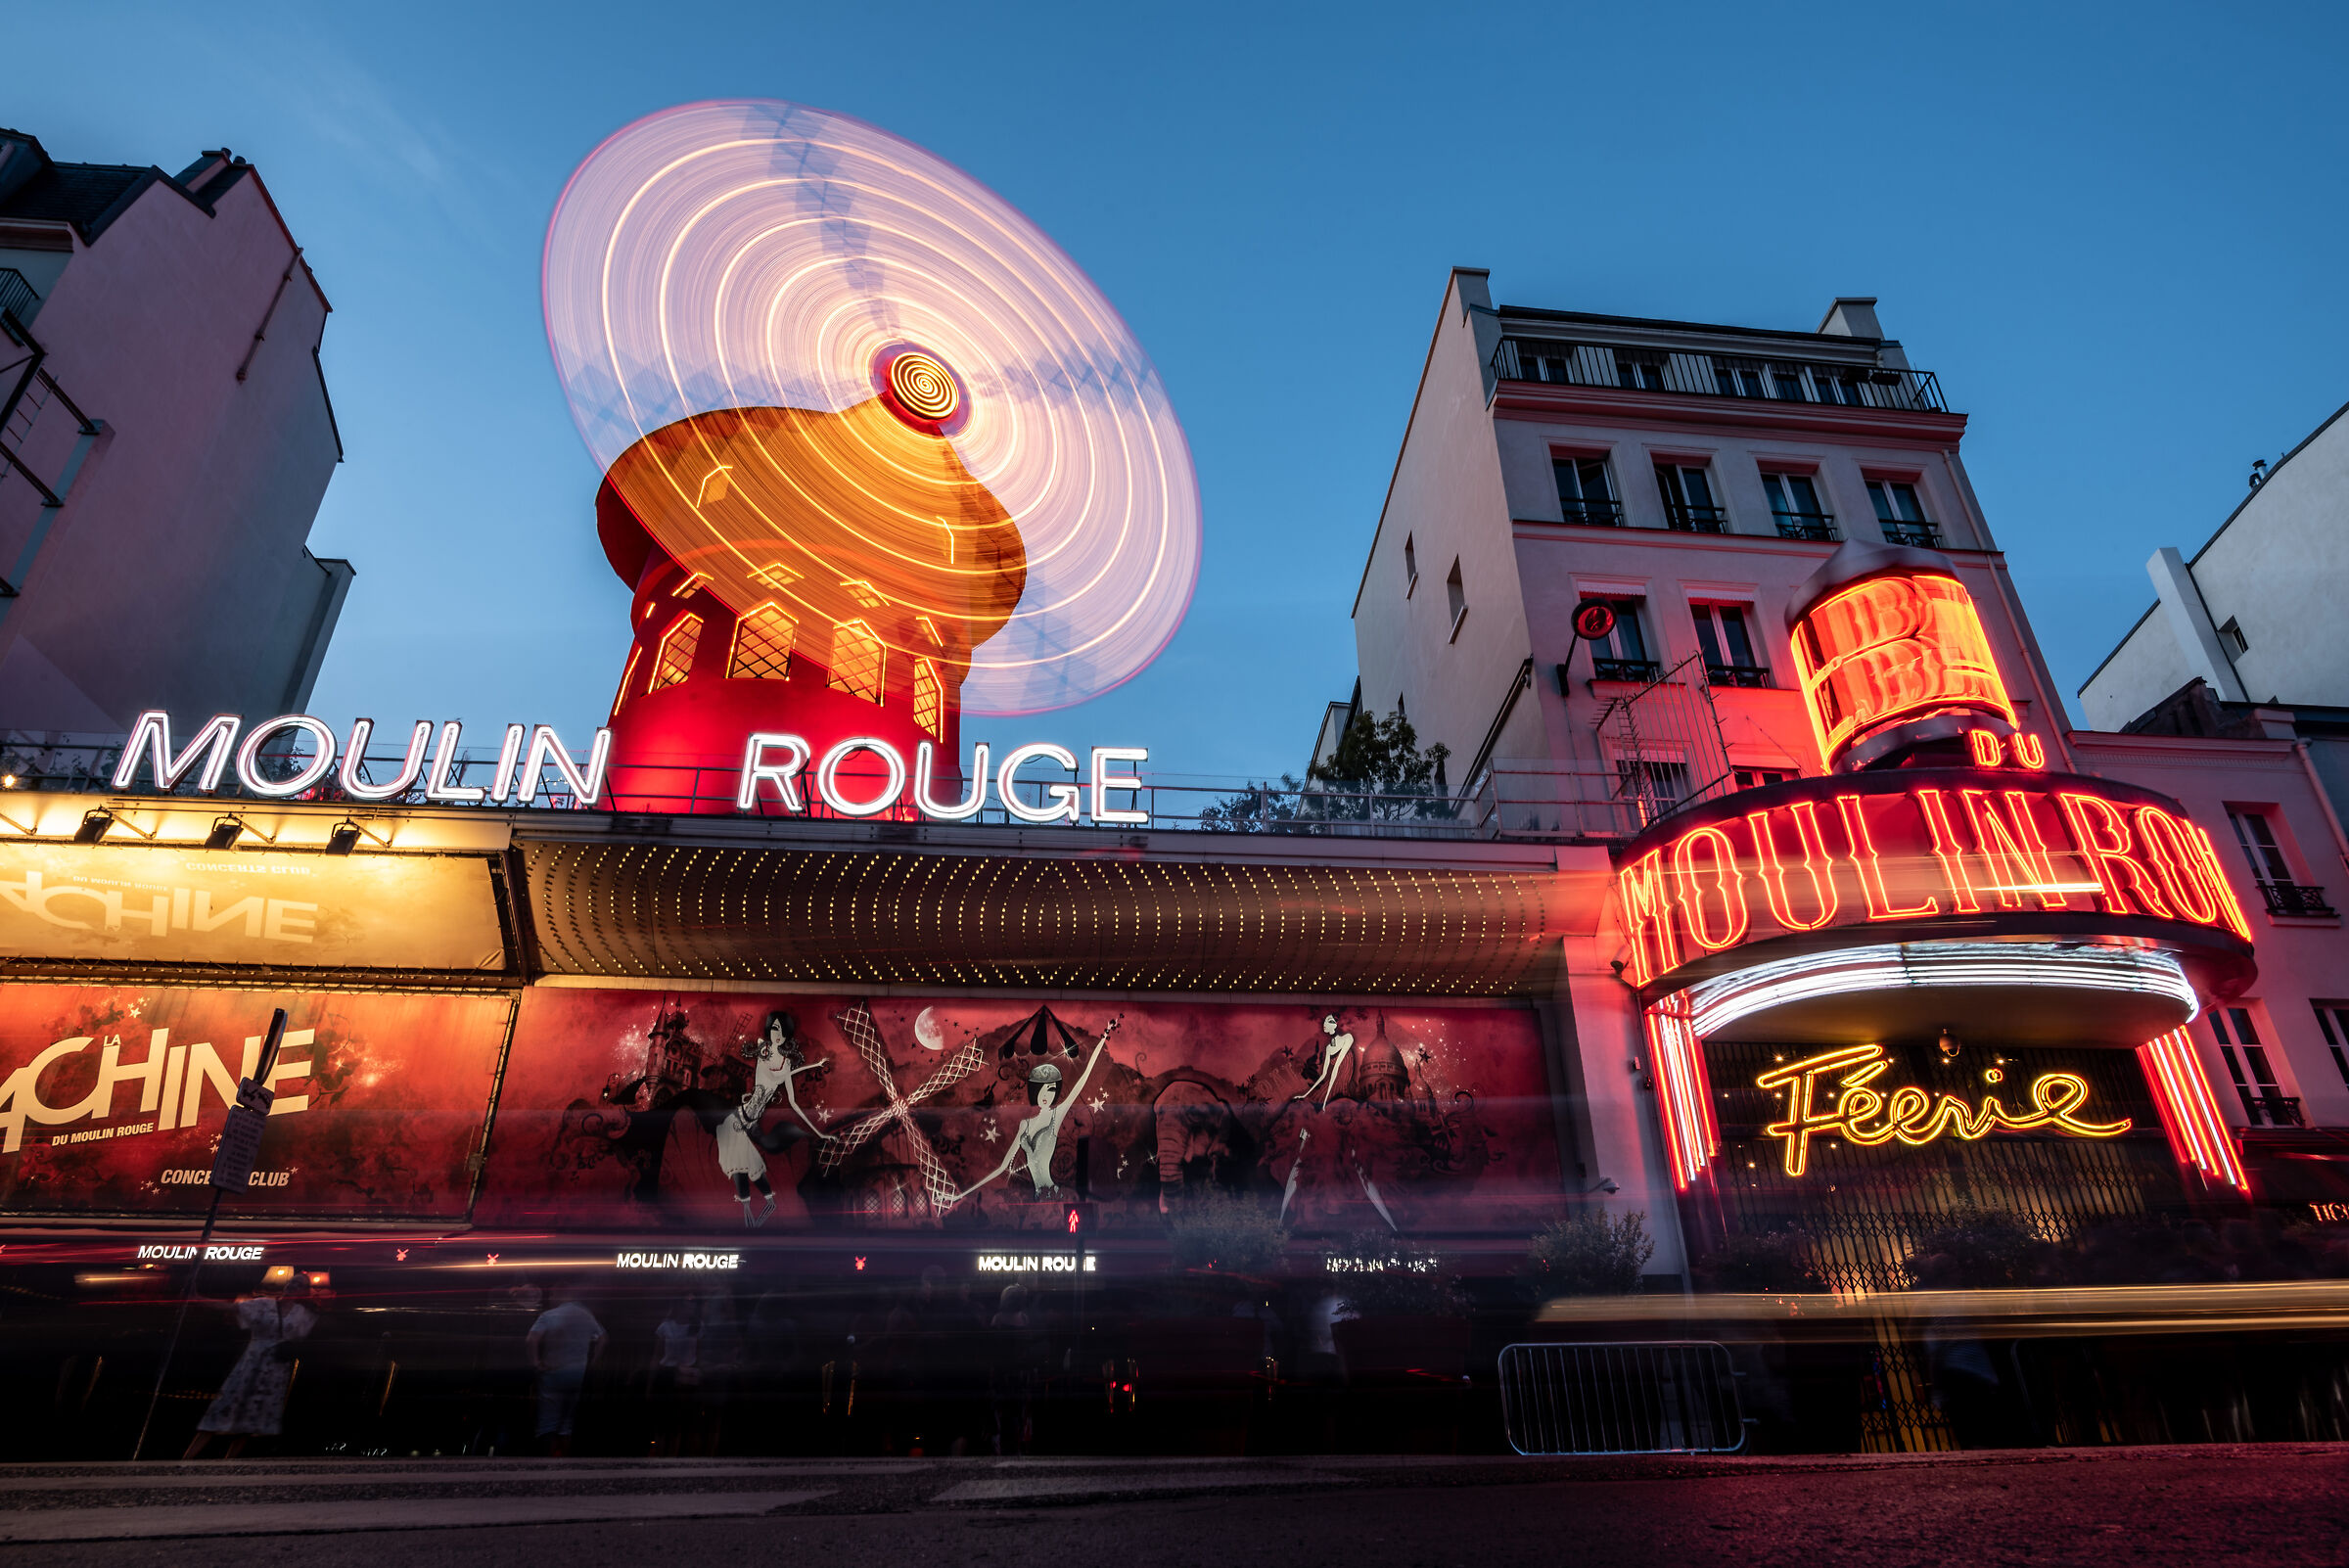 Moulin rouge...